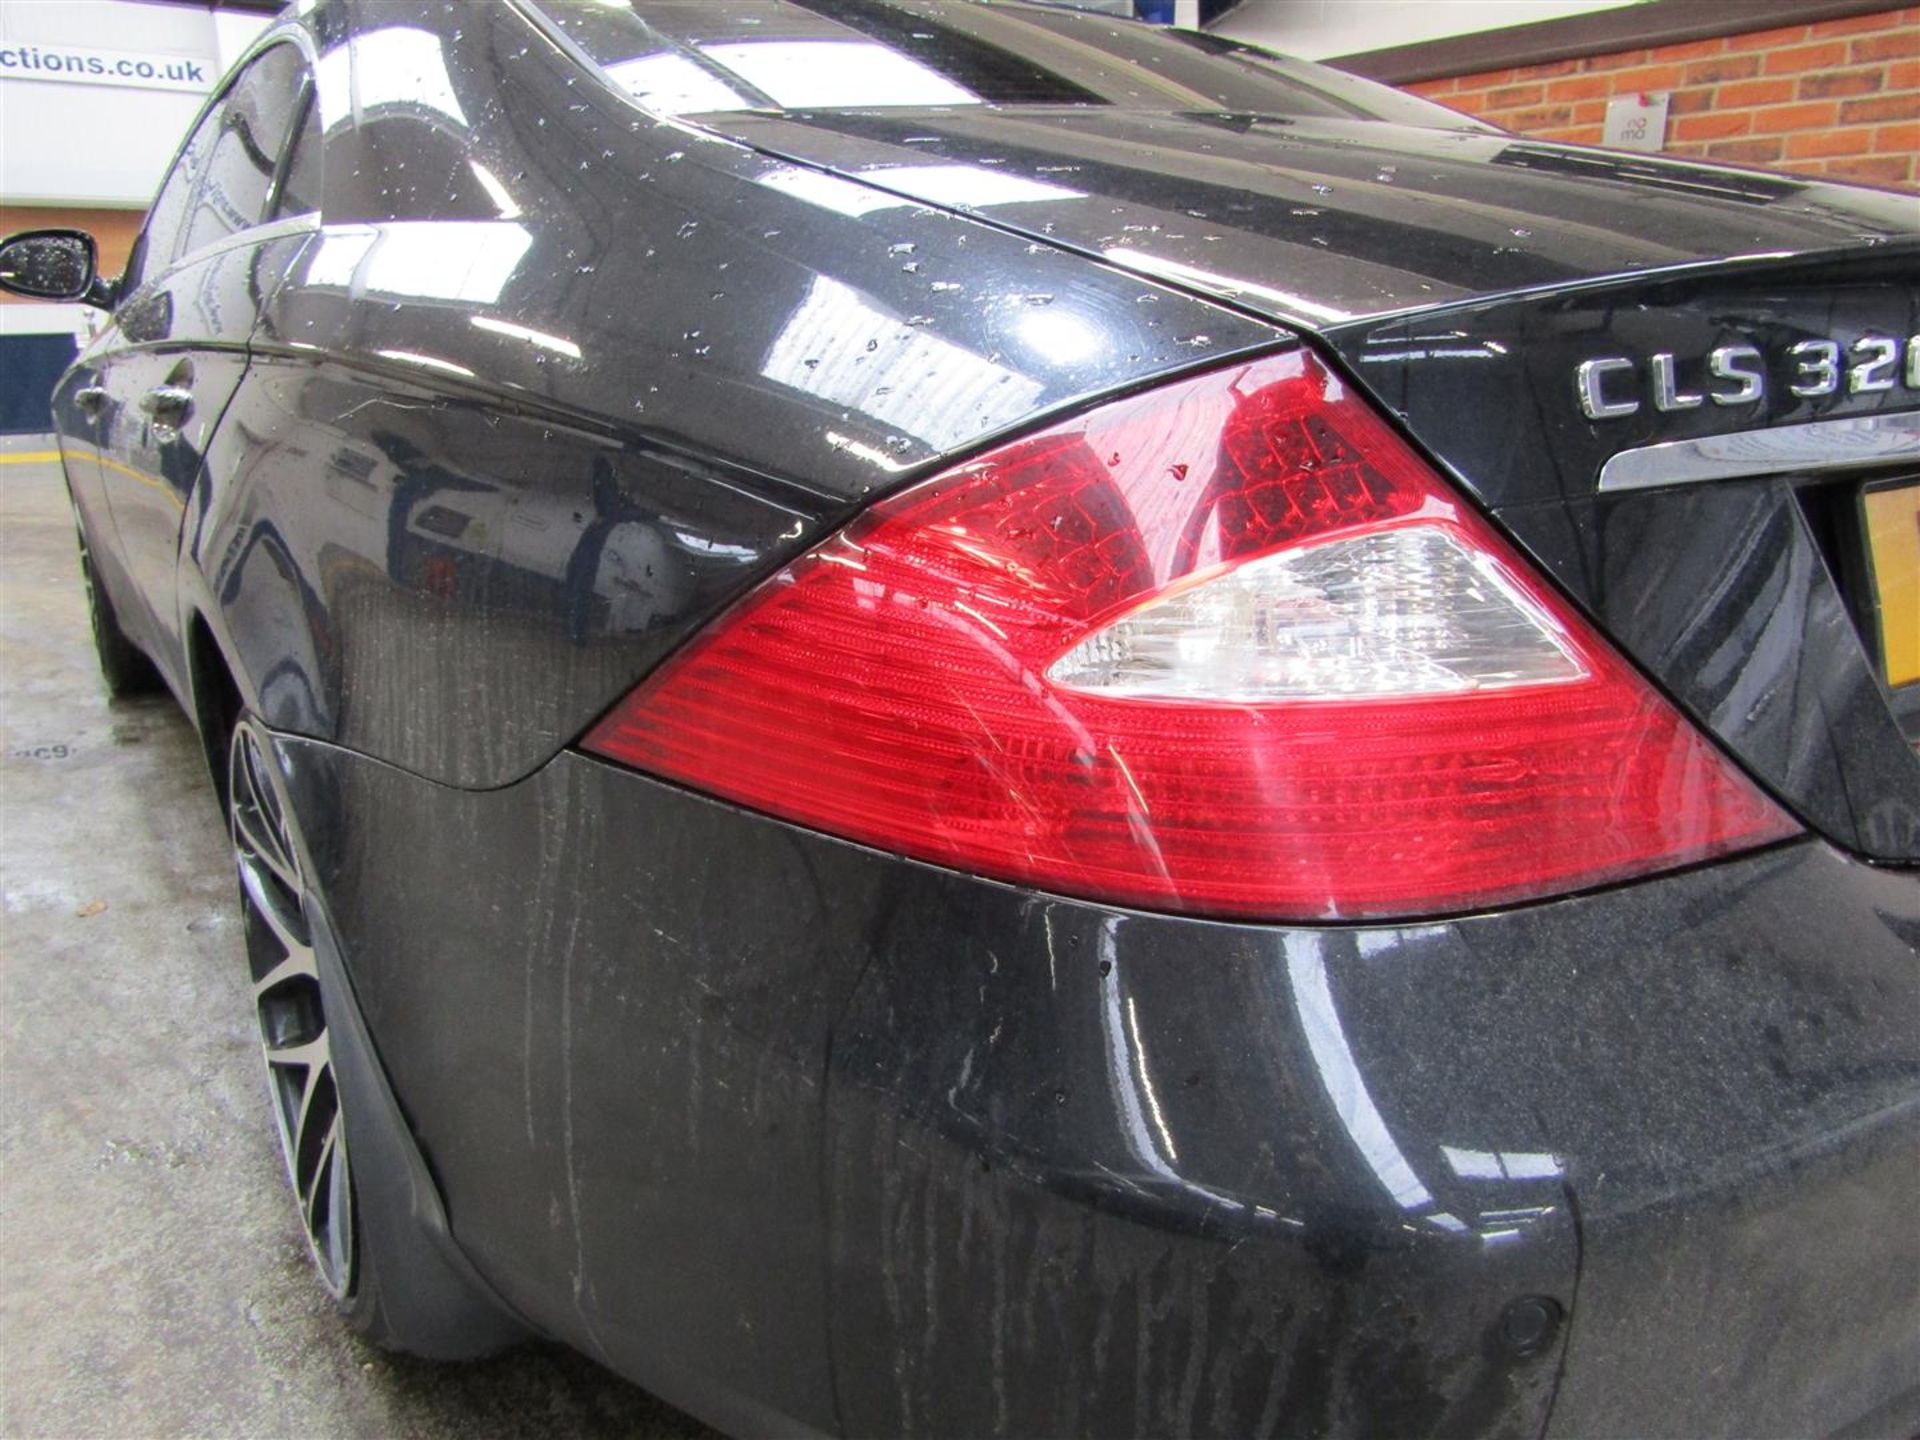 2006 Mercedes CLS 320 CDI - Image 13 of 24